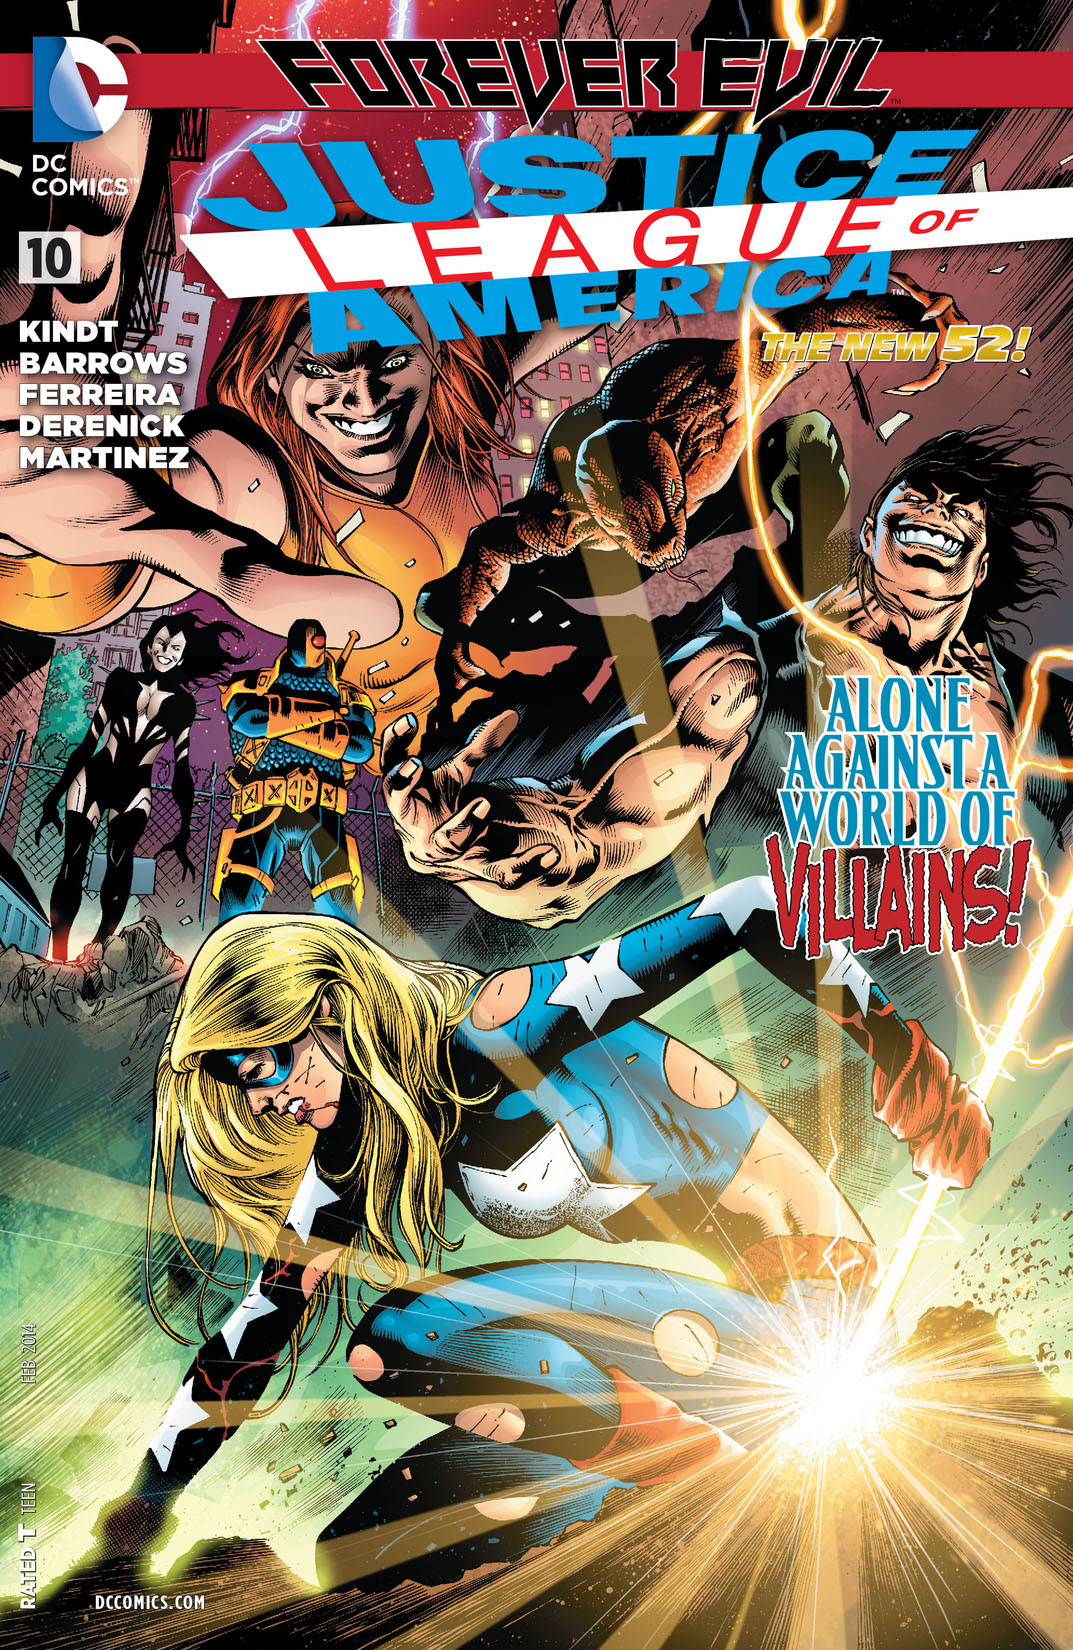 Justice League of America (2013-) #10 preview images